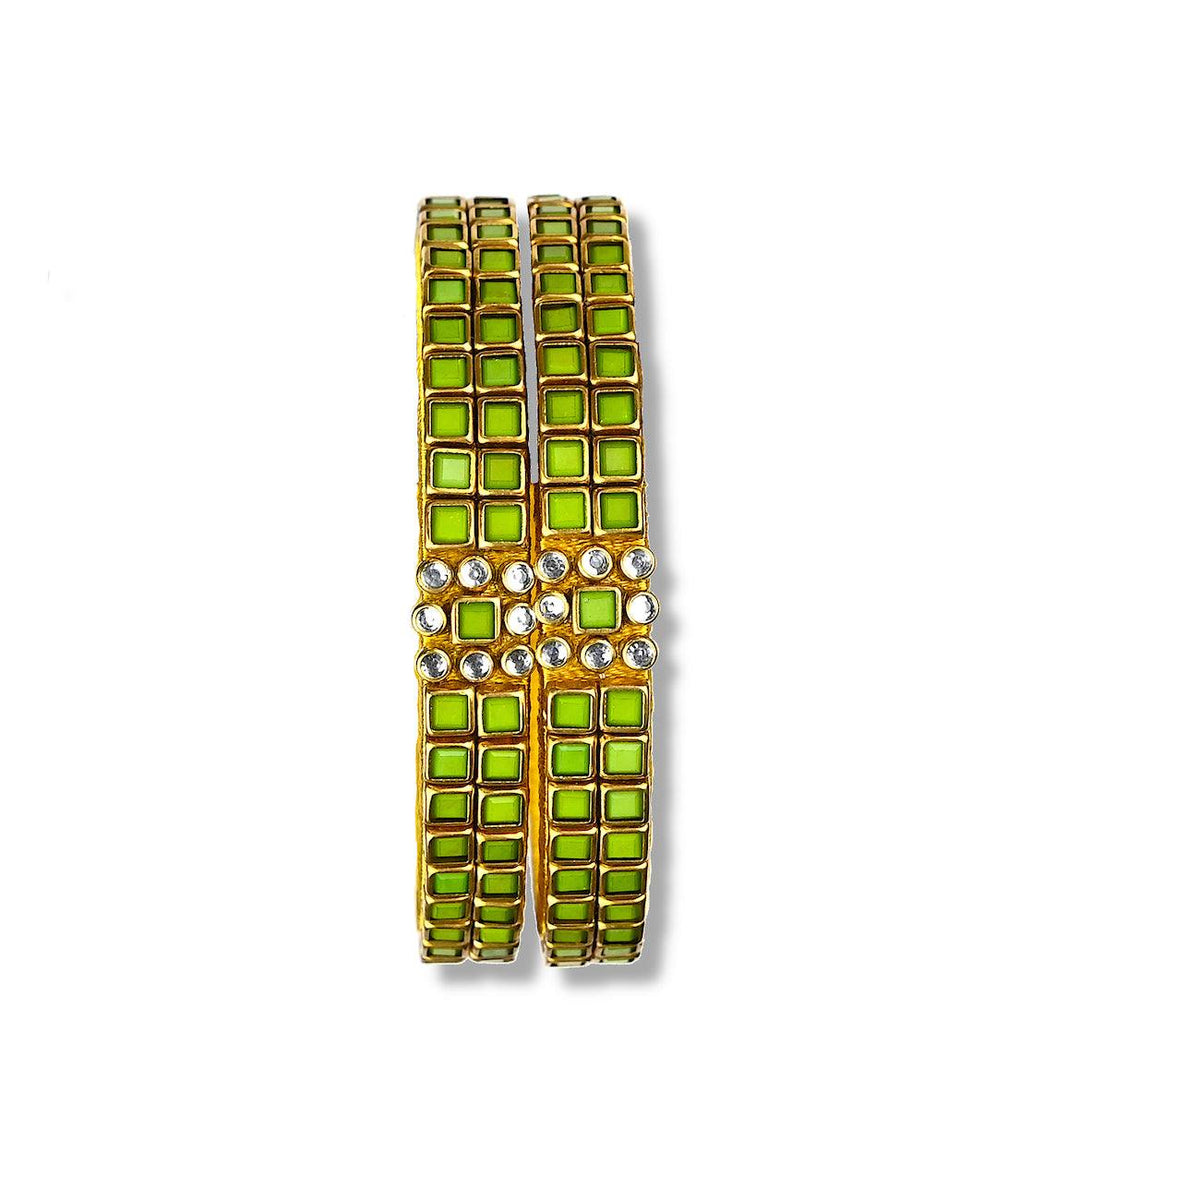 Green Kundan stone bangle decorated with lime green and glass colored Kundan stone bezels in square & circle shape over gold silk threads.